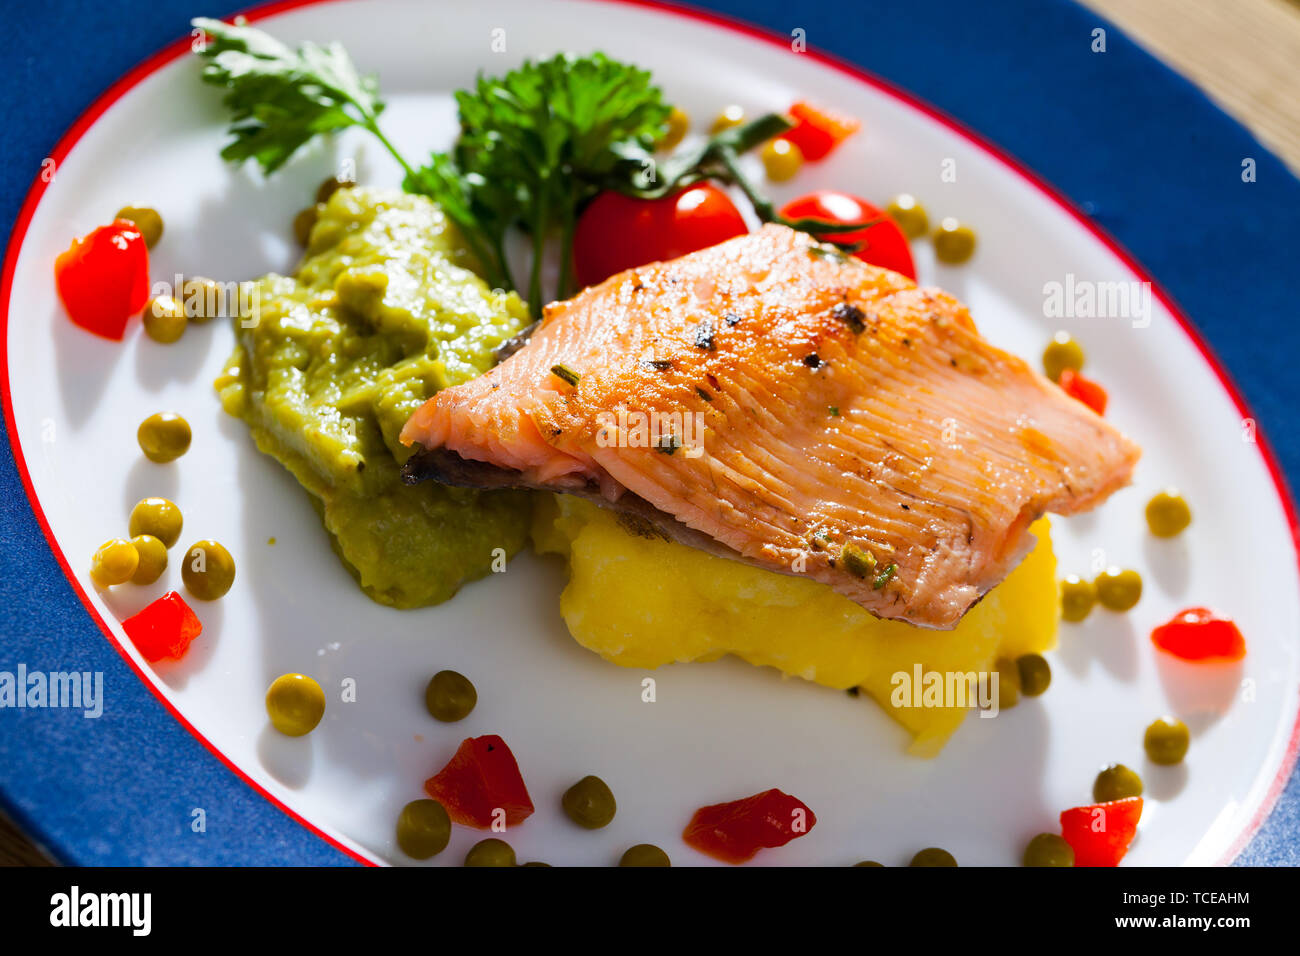 Fried trout fillet served with mashed potatoes and guacamole Stock Photo